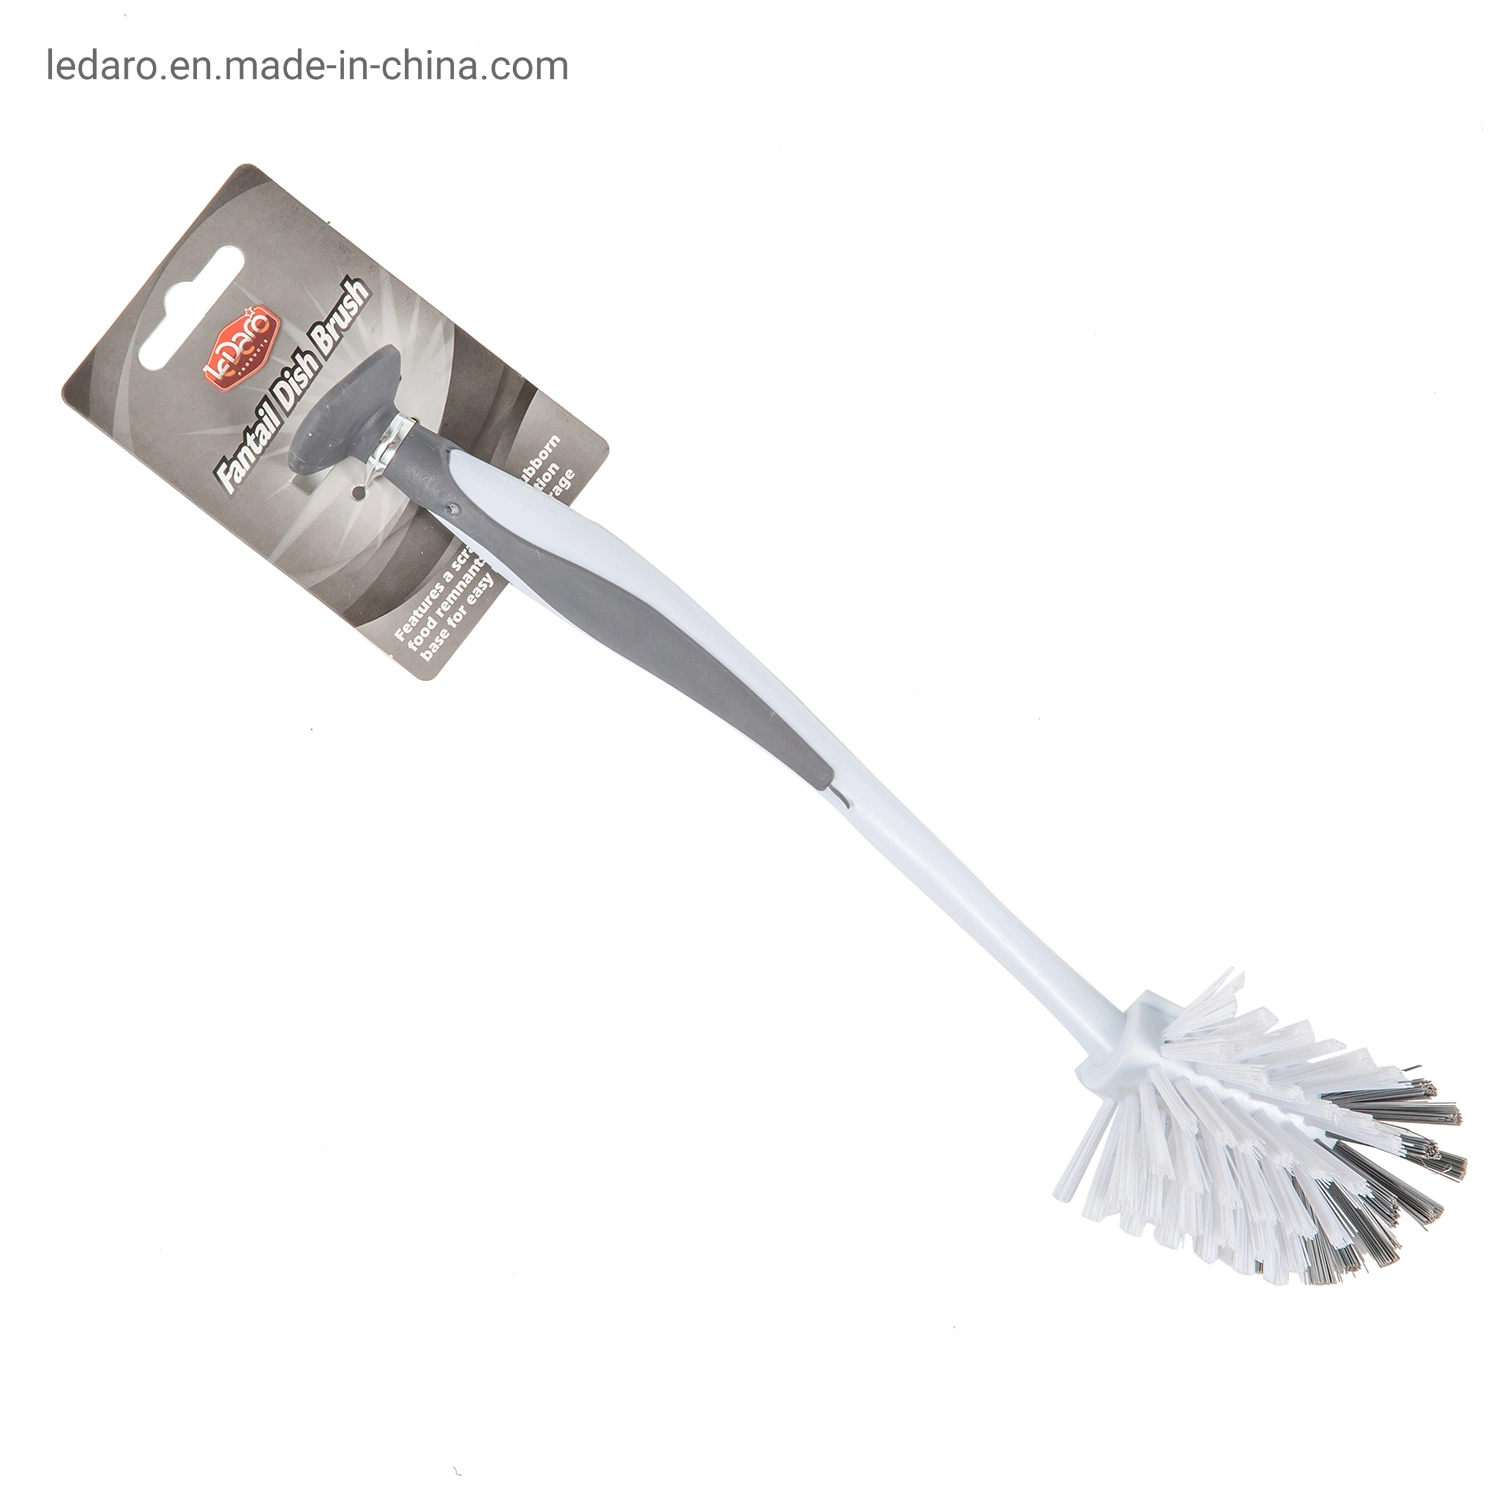 Washing up Brushes Long Handled Dish Brush for Cleaning Pots, Pans, Dishes, Kitchen Brush, Suitable for Your Daily Cleaning